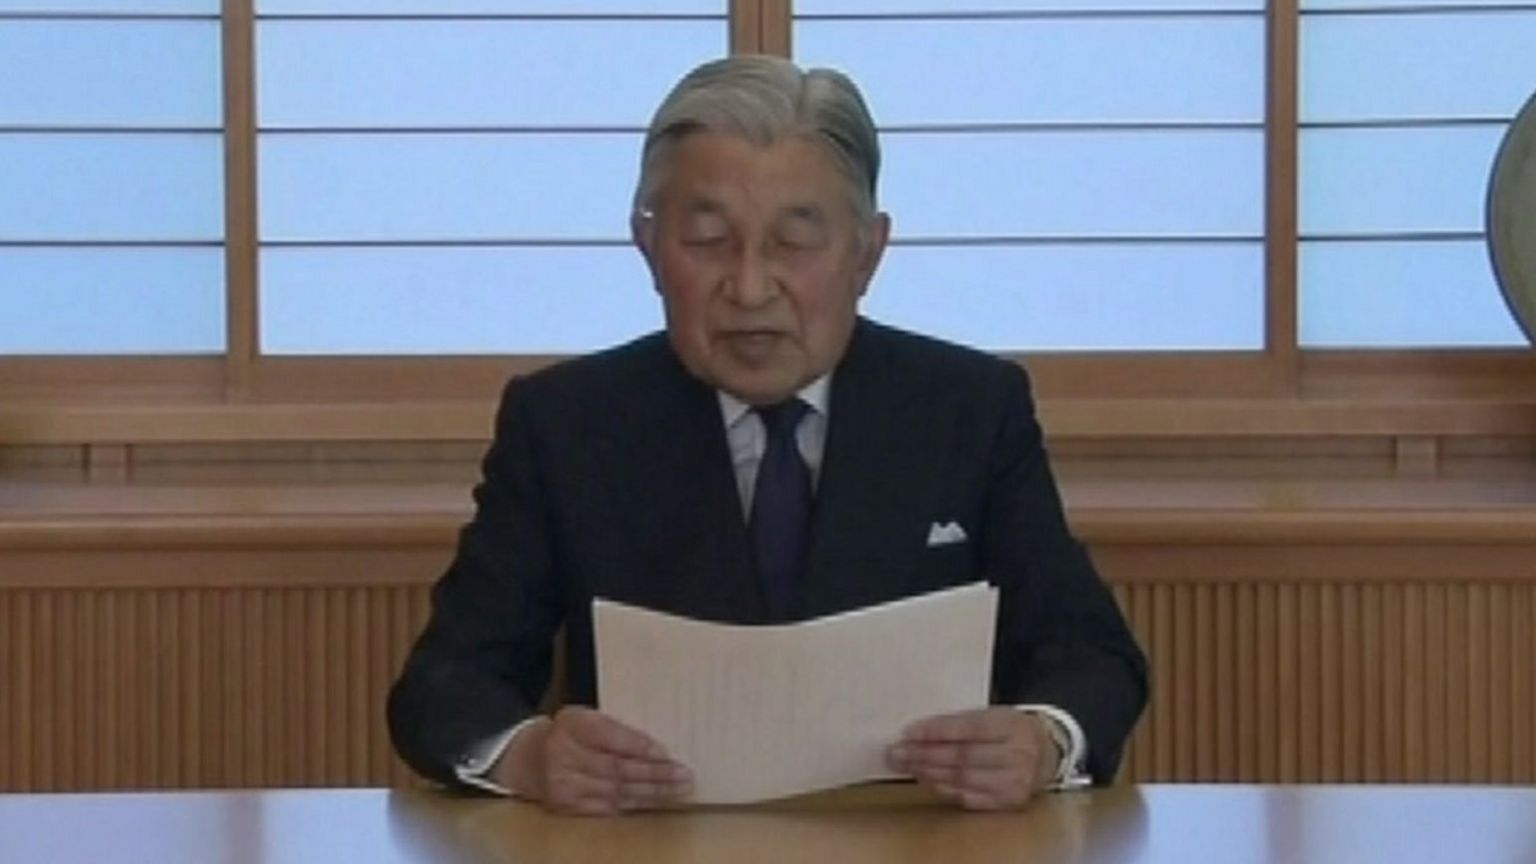 The Emperor, making his address on 8 August 2016.